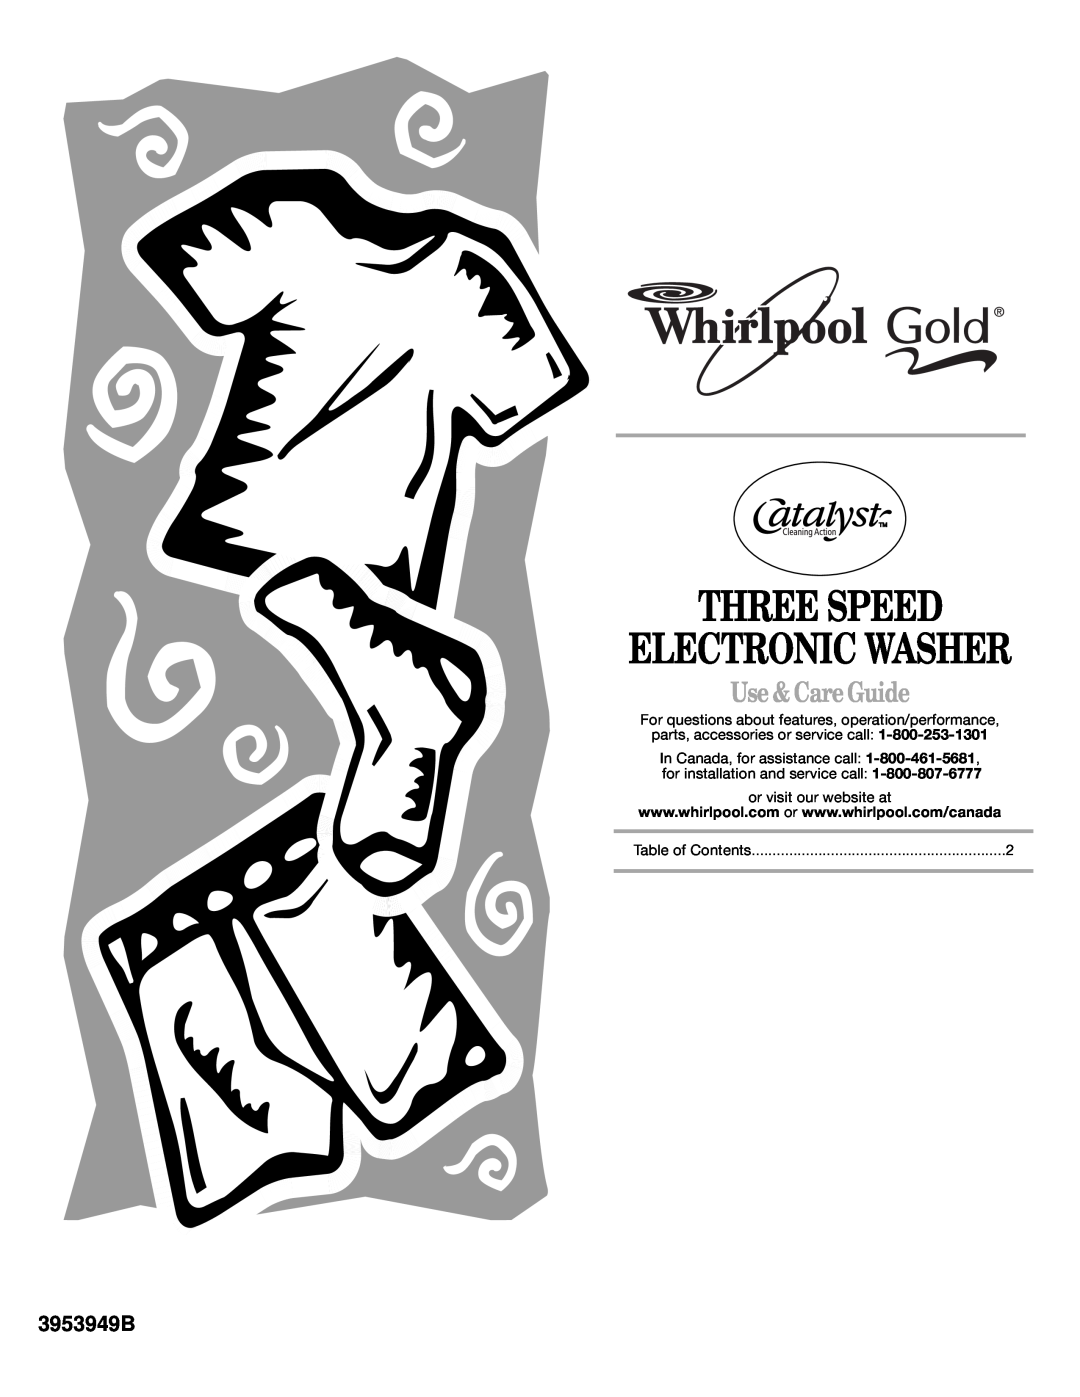 Whirlpool CATALYST manual Three Speed, Use &CareGuide, 3953949B, Electronic Washer 